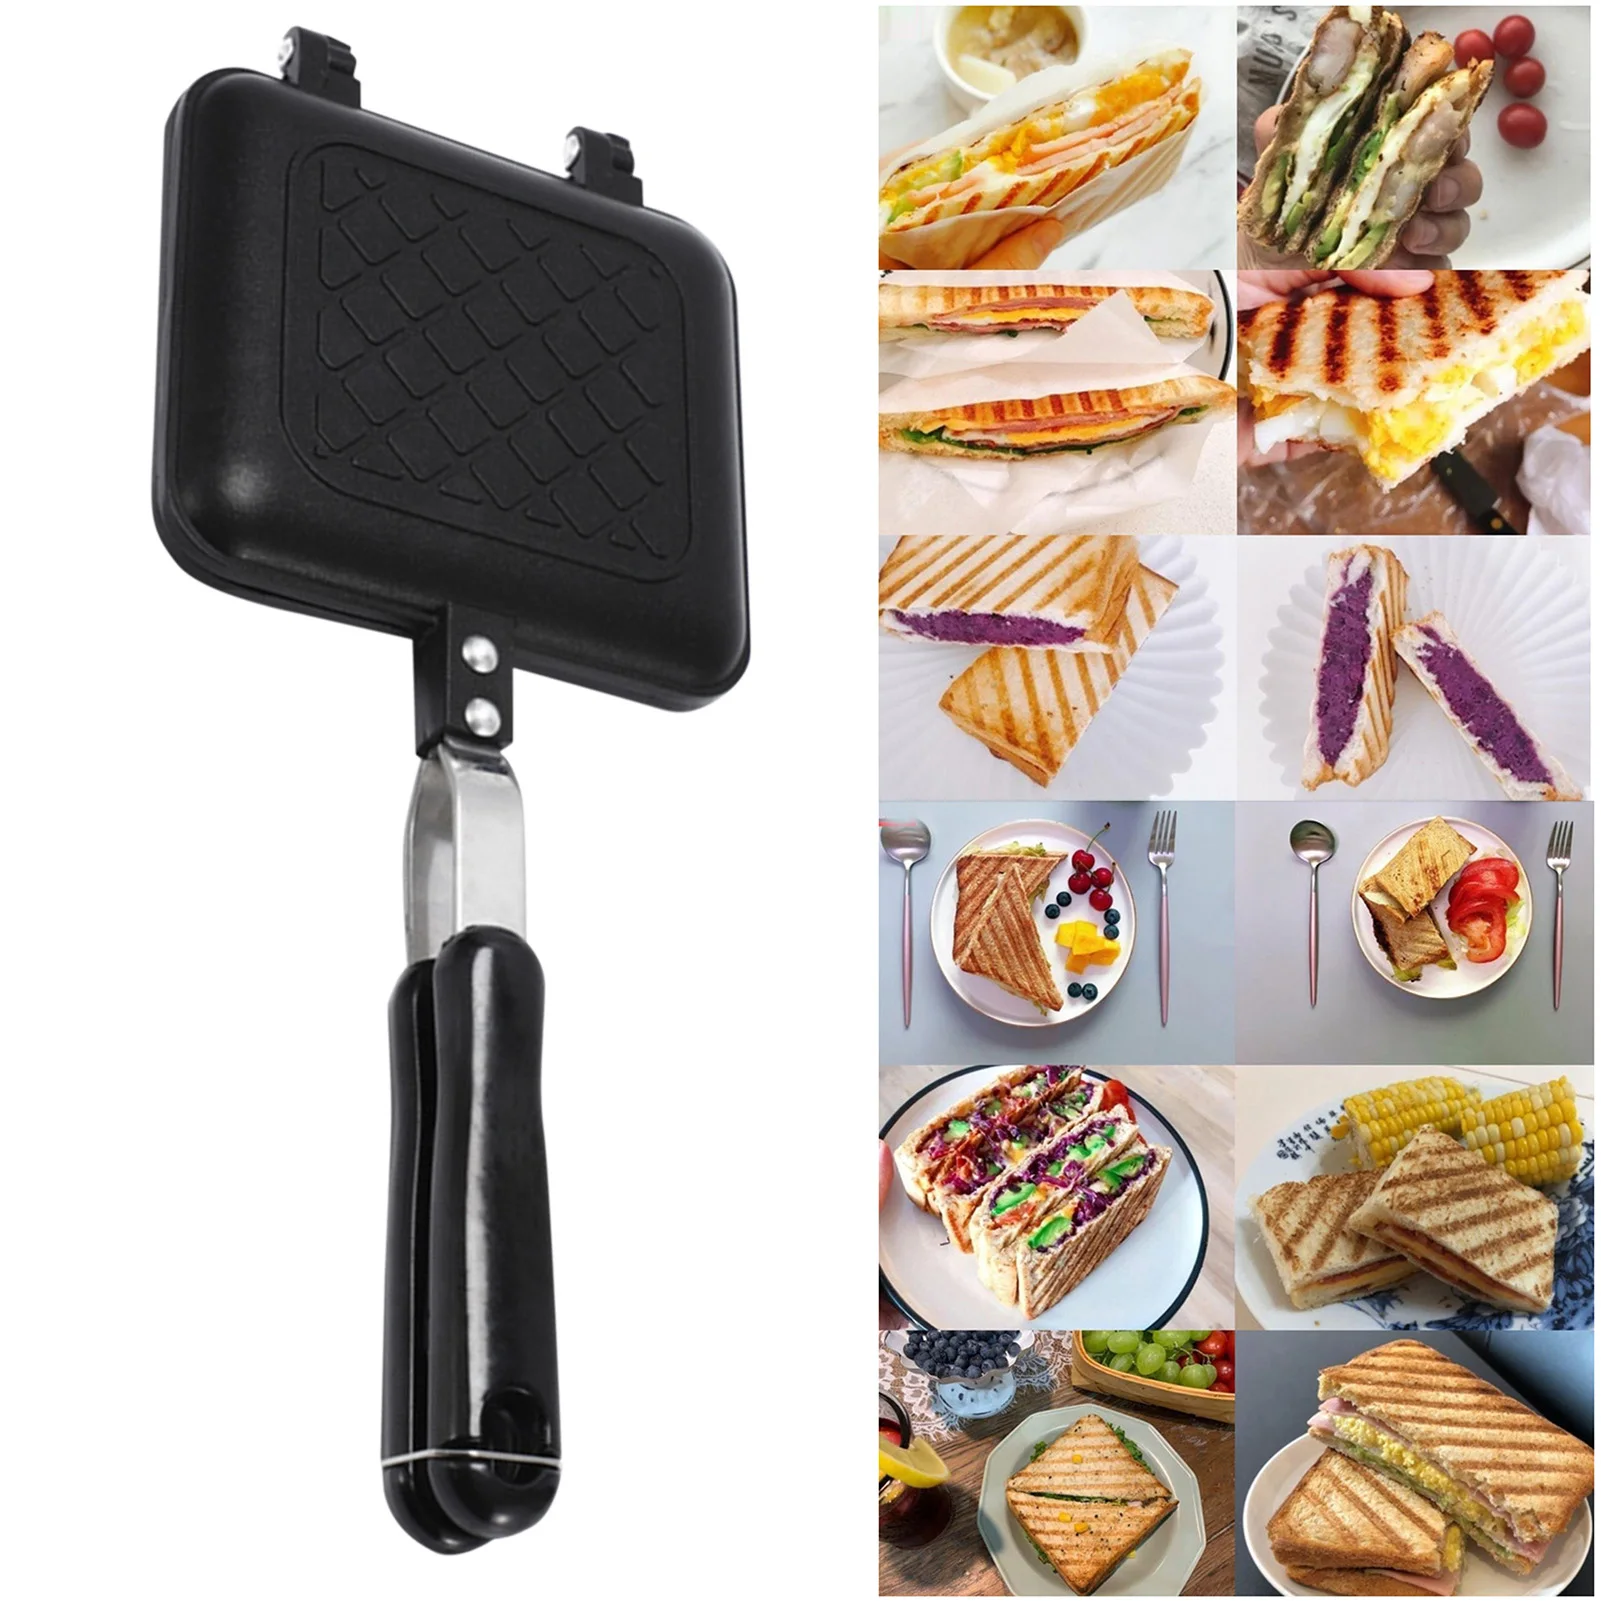 Cake Breakfast Machine Barbecue Steak Frying Oven Camping